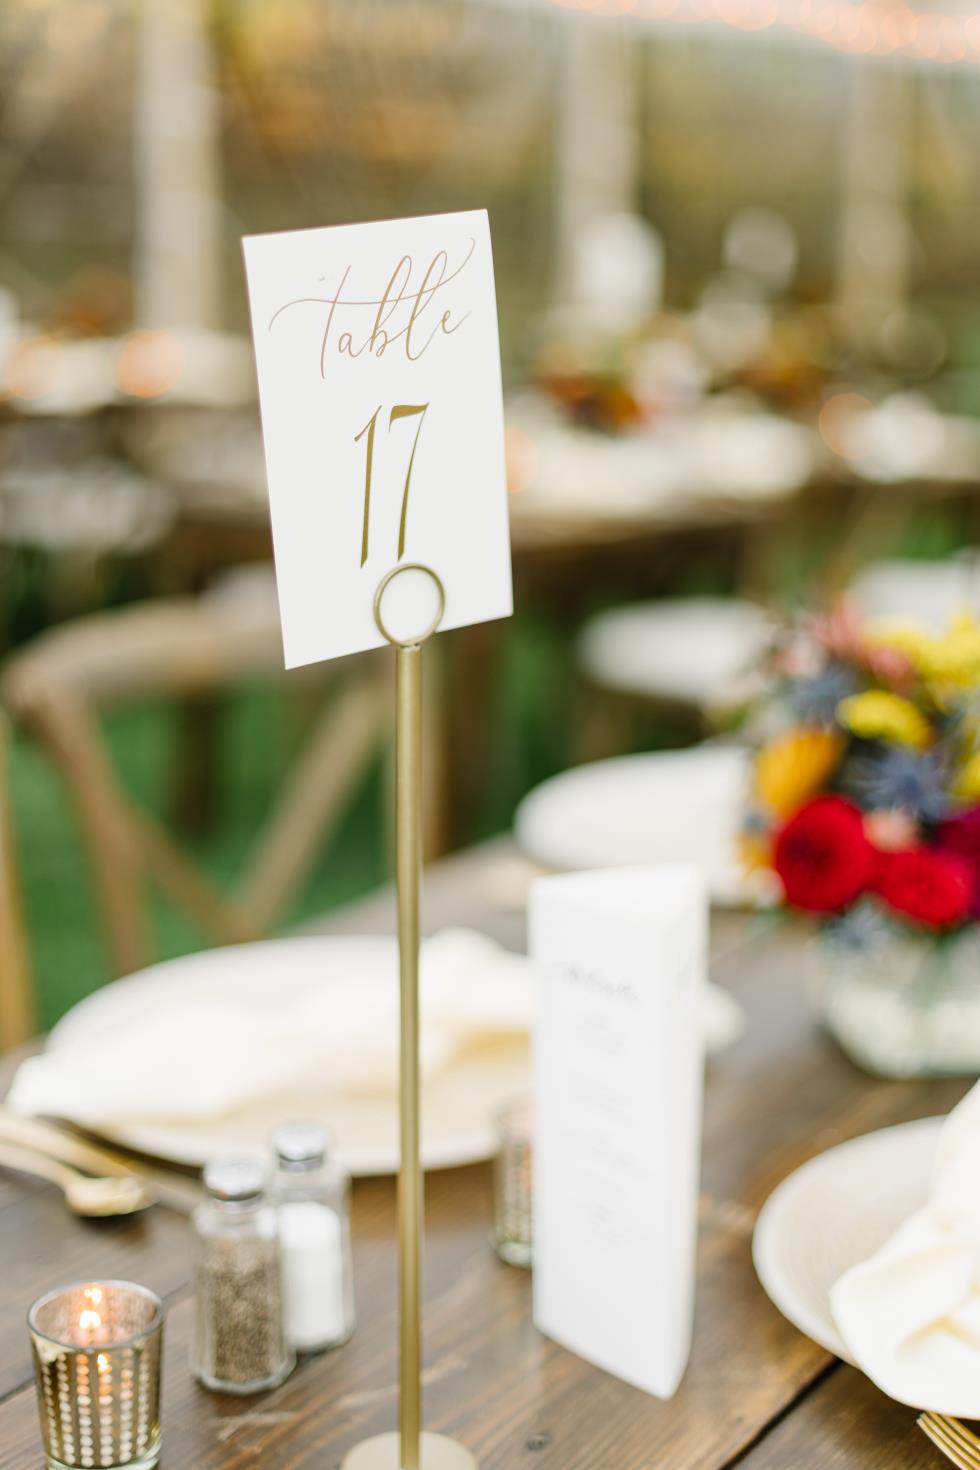 table-numbers